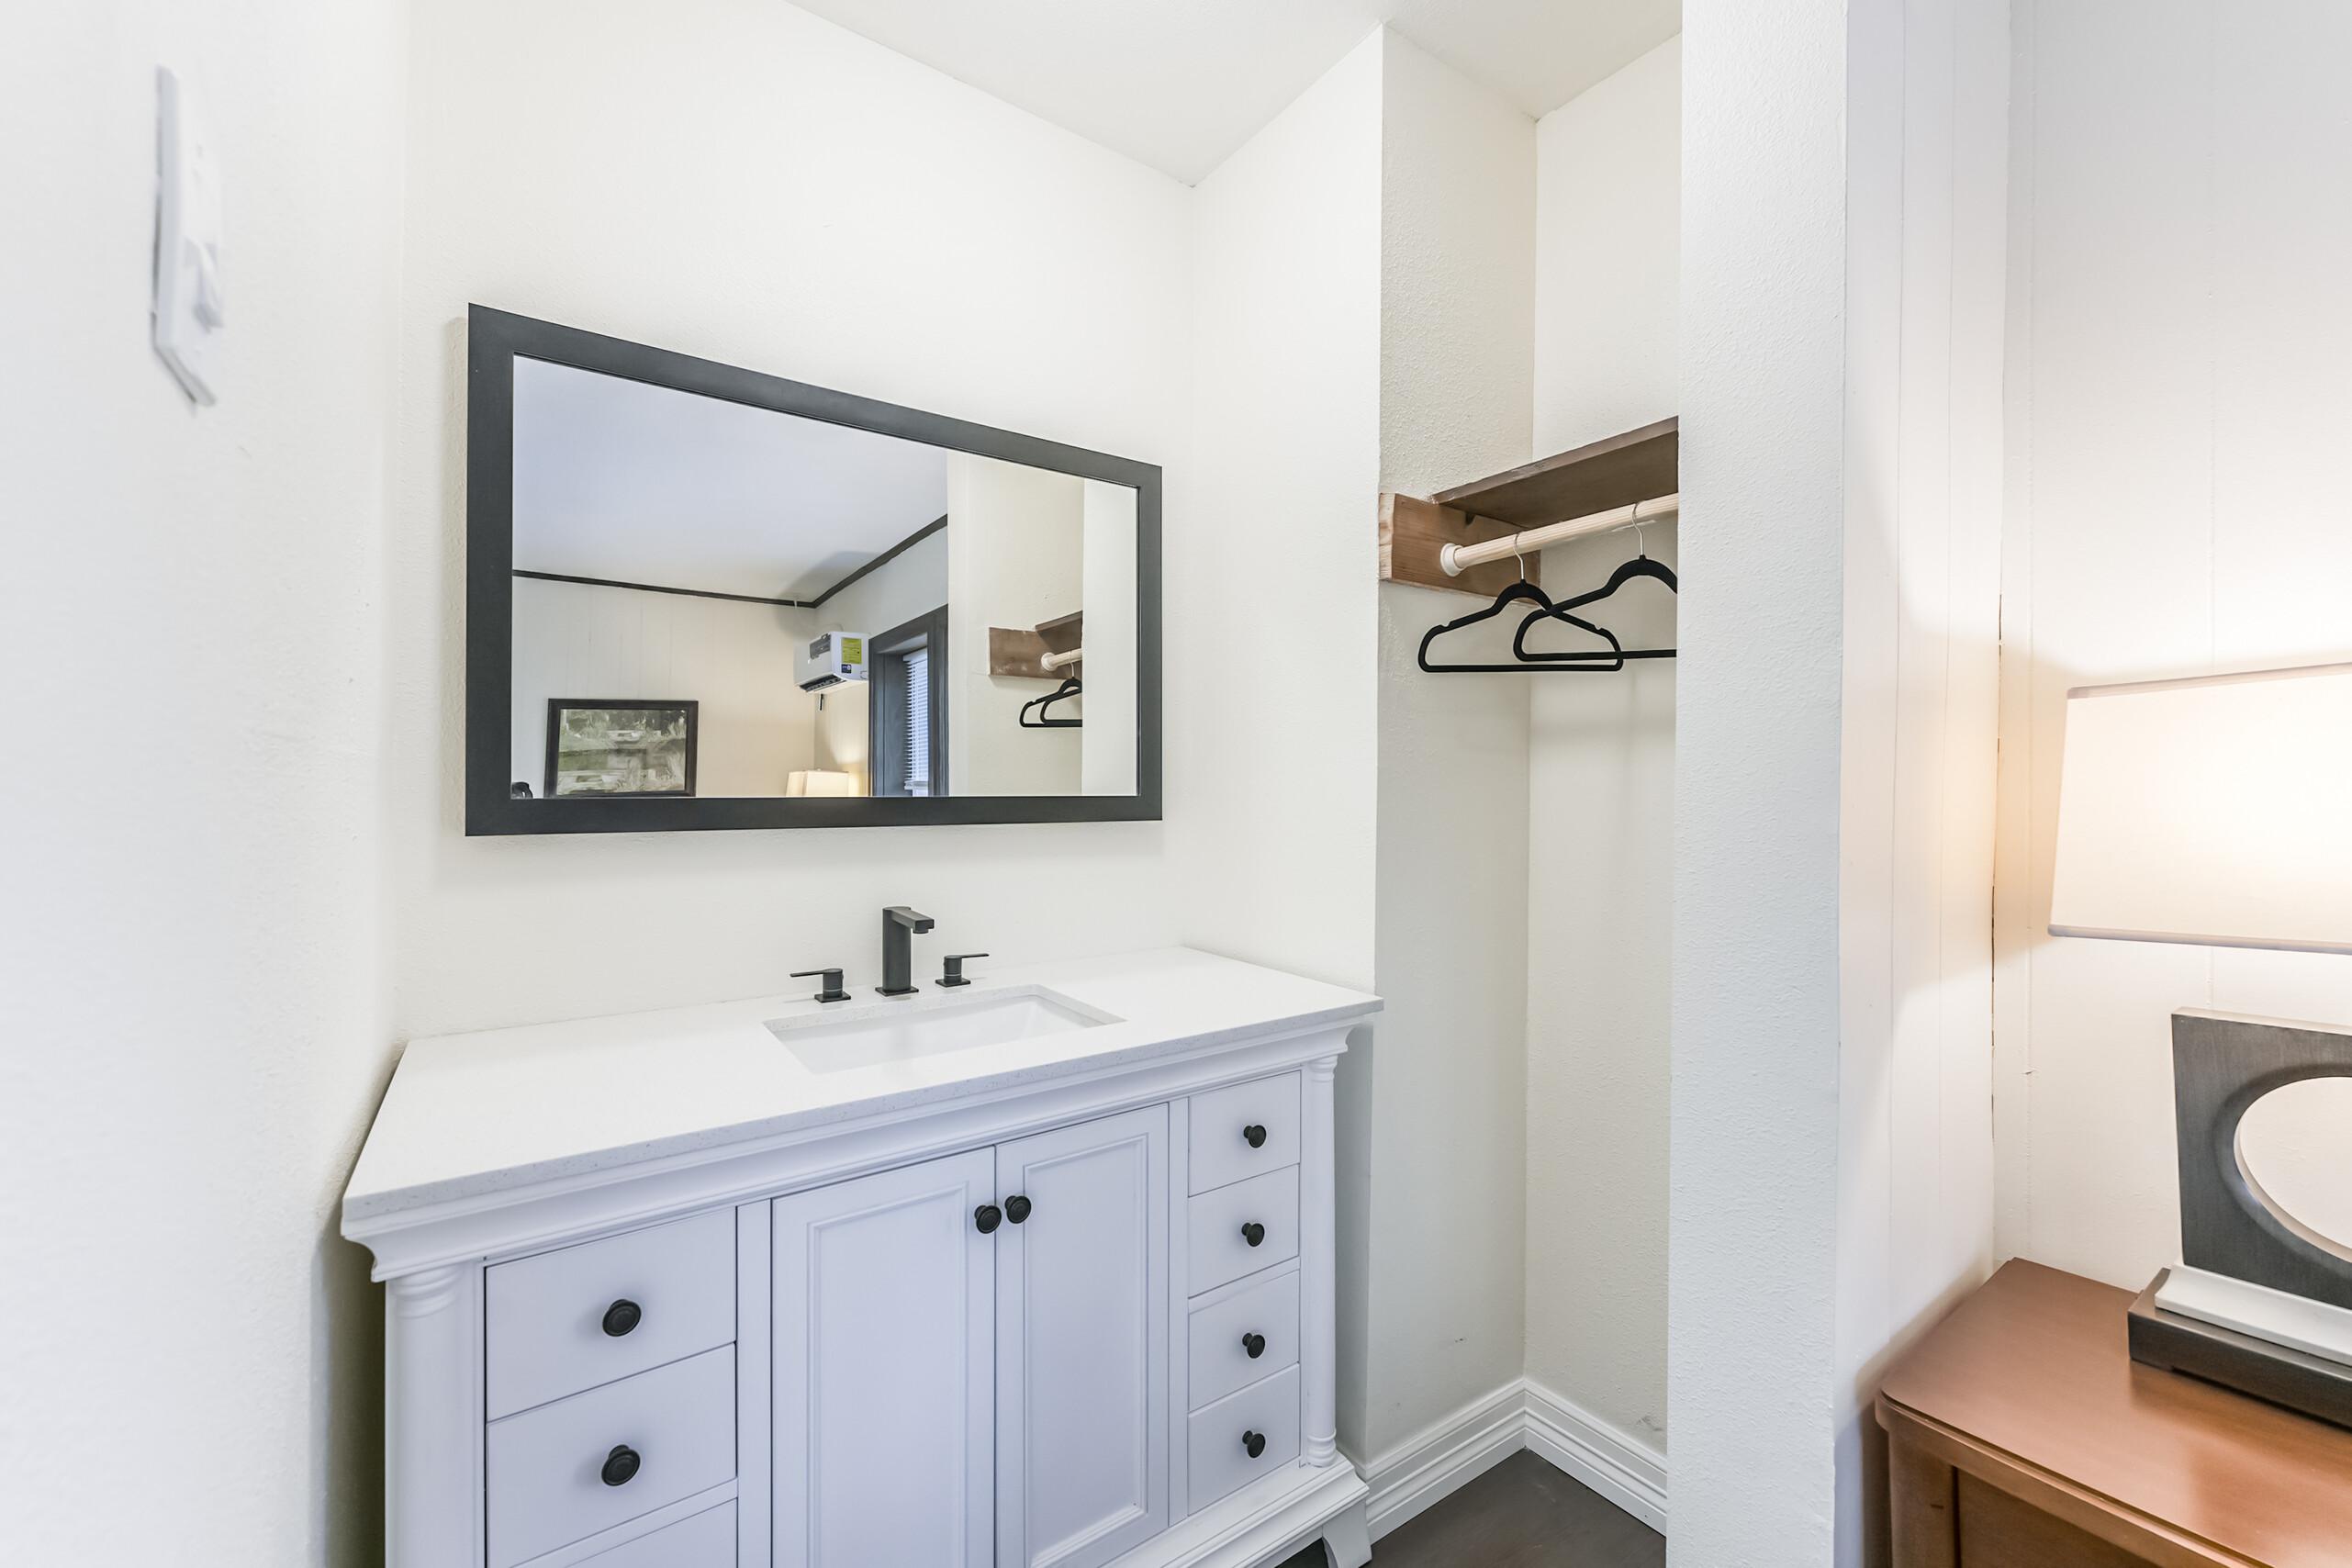 Large private vanity area